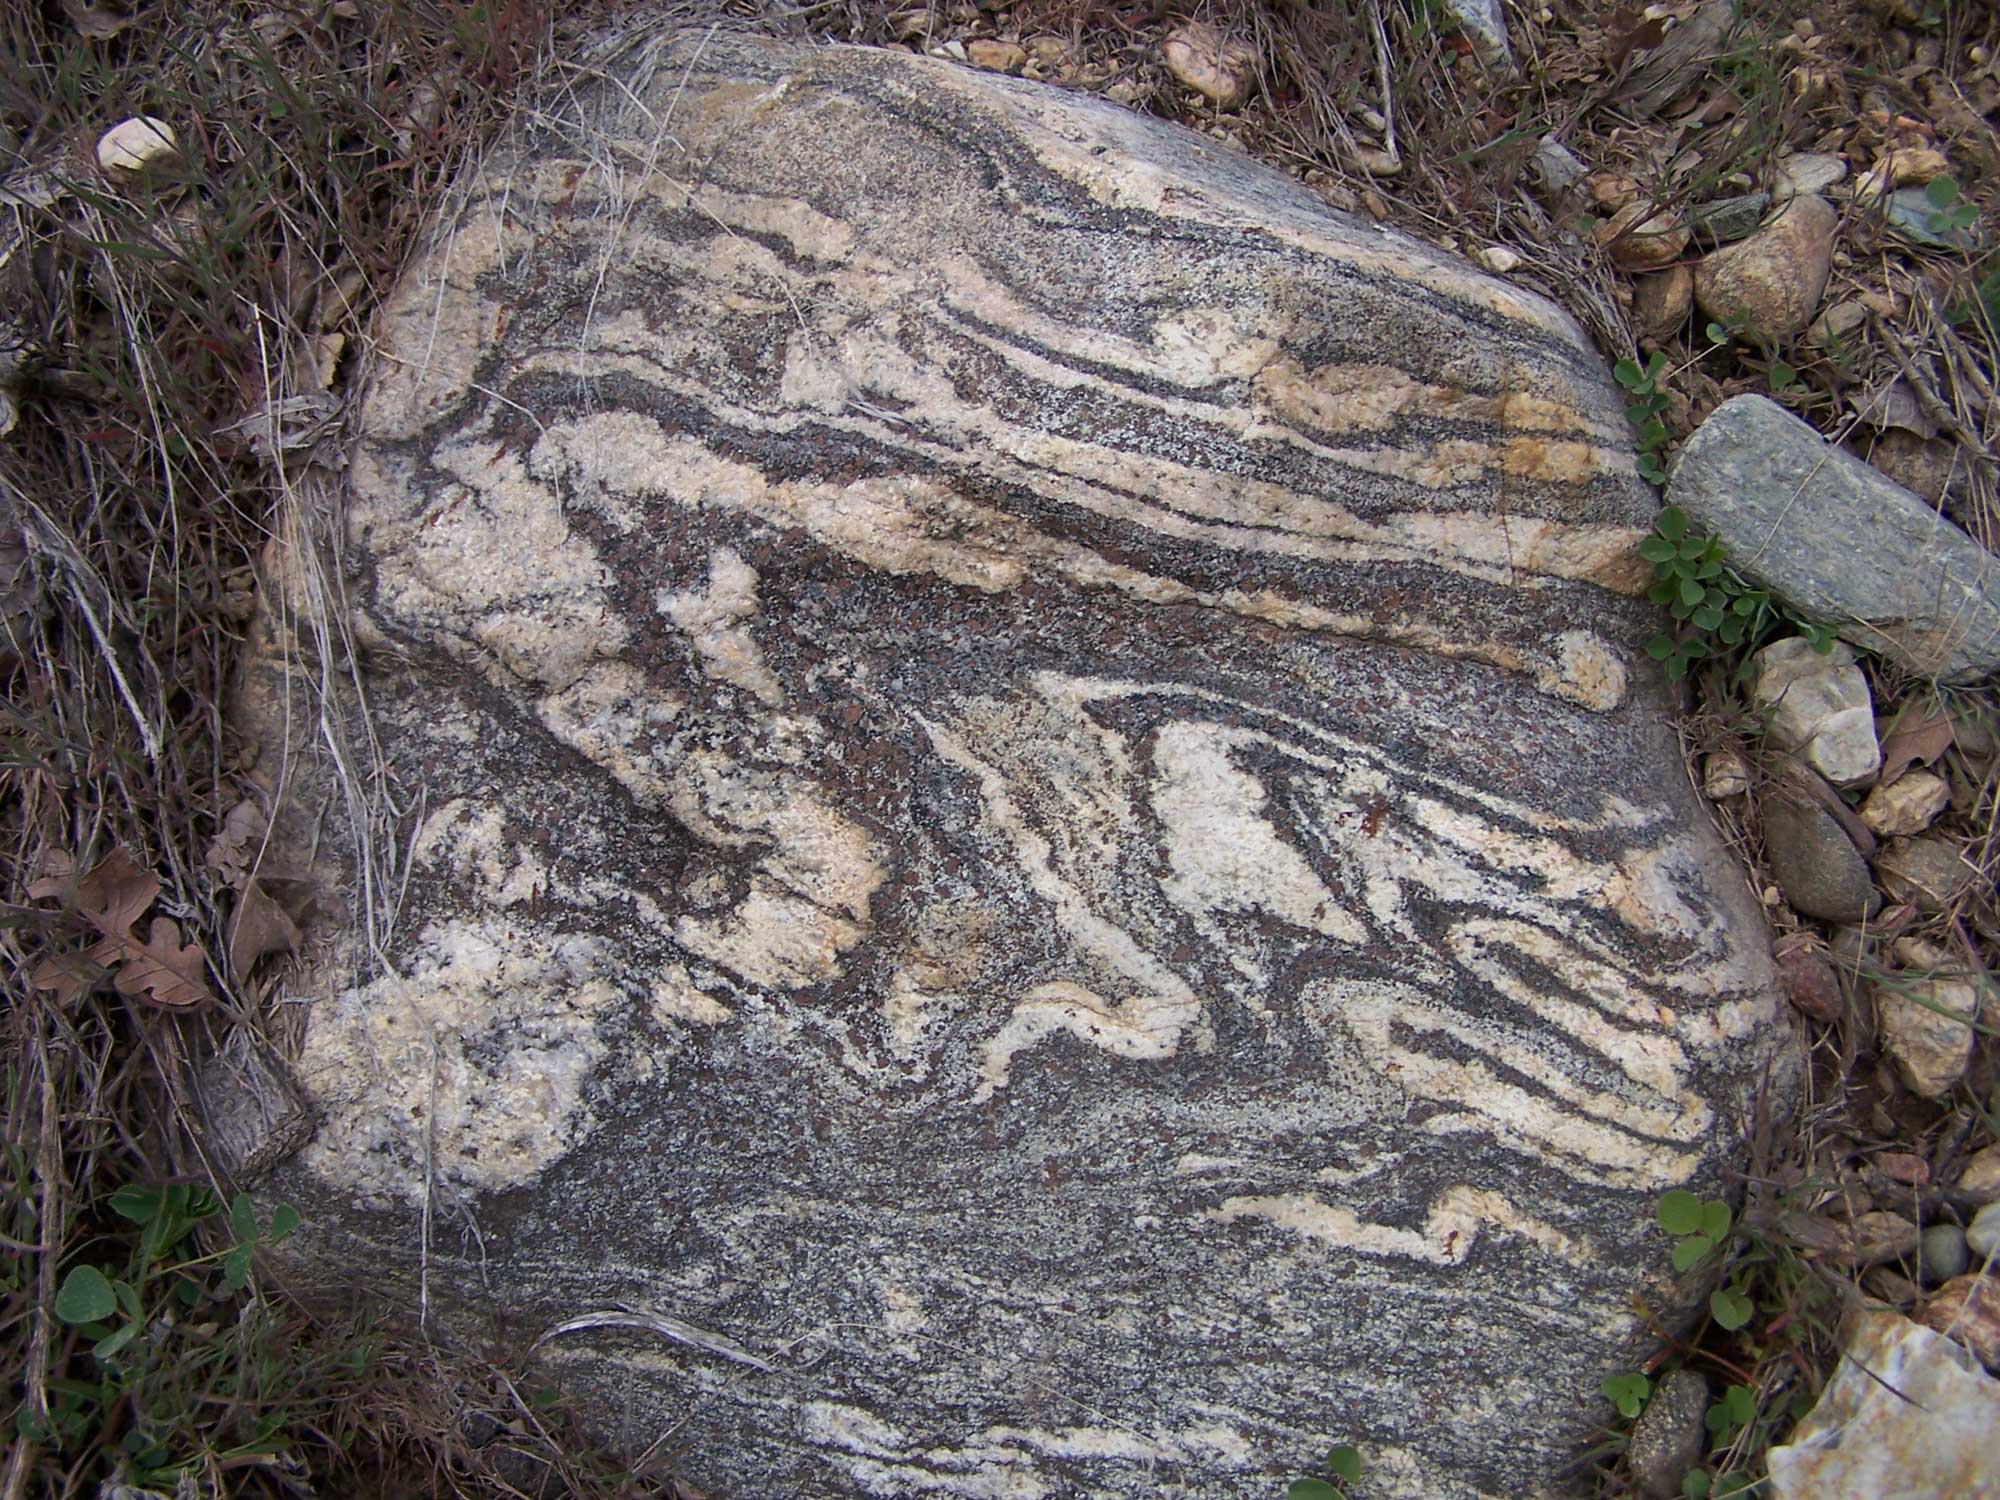 Photograph of a boulder of garnet gneiss. The rock shows a sinuous pattern of beige and burgundy-gray areas.